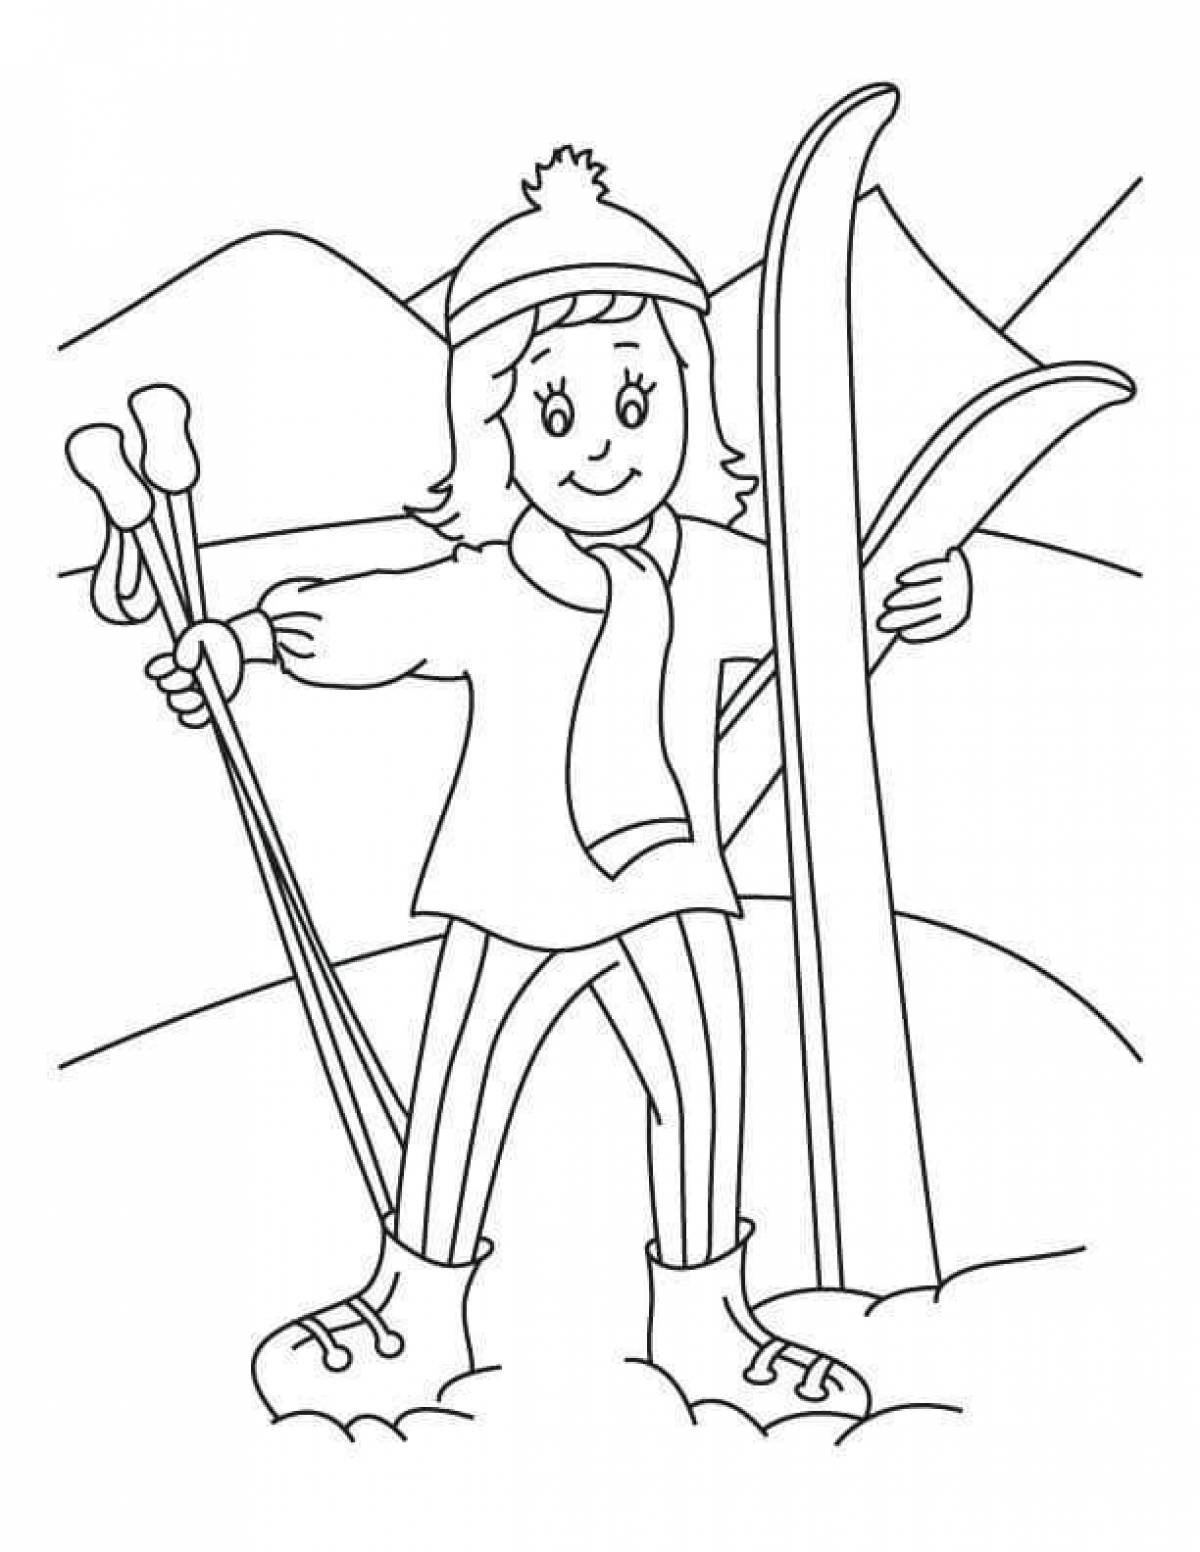 Coloring page outgoing skier